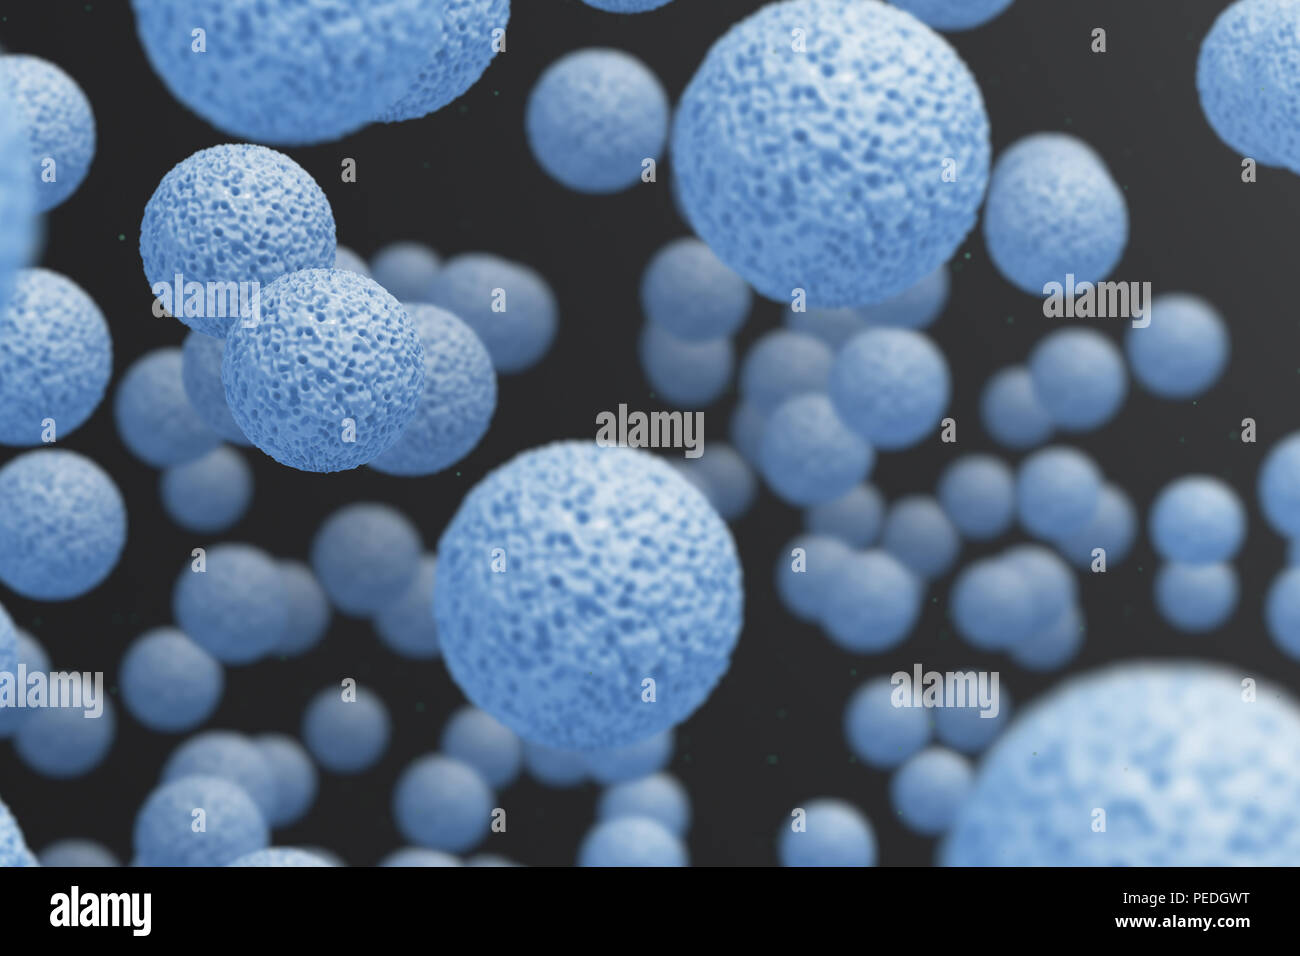 High resolution microbes. Cells under a microscope Stock Photo